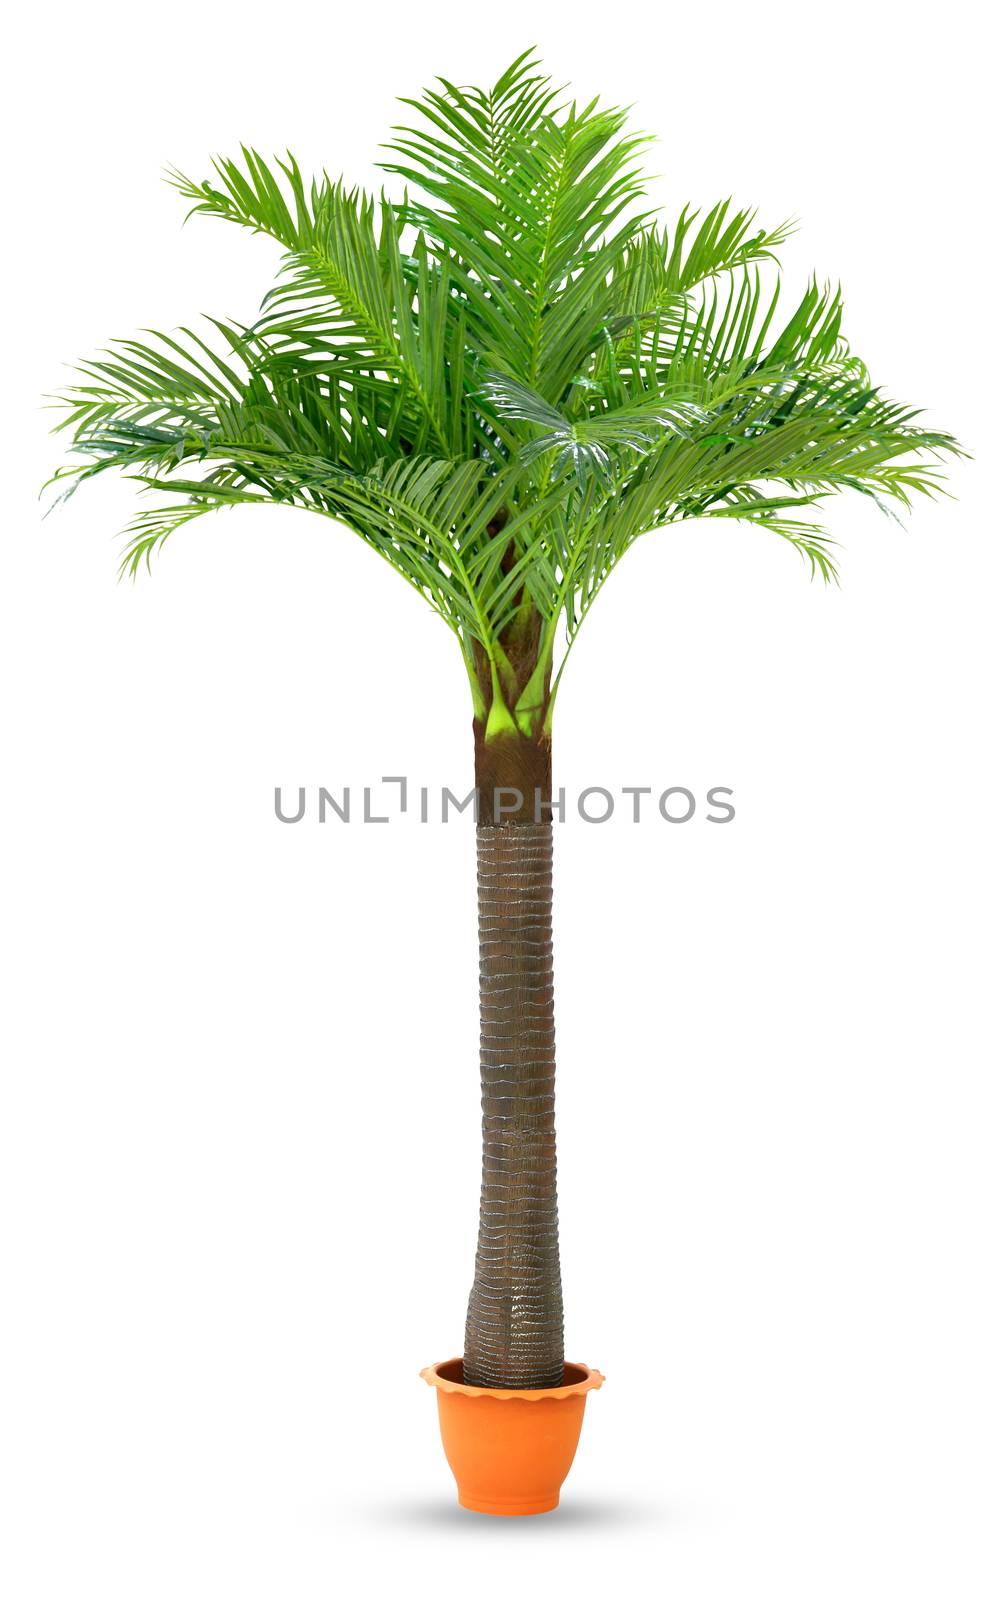 Coconut palm tree in pot plastic isolated white background, Coconut tree for decoration booth exhibitions prop display garden design by cgdeaw